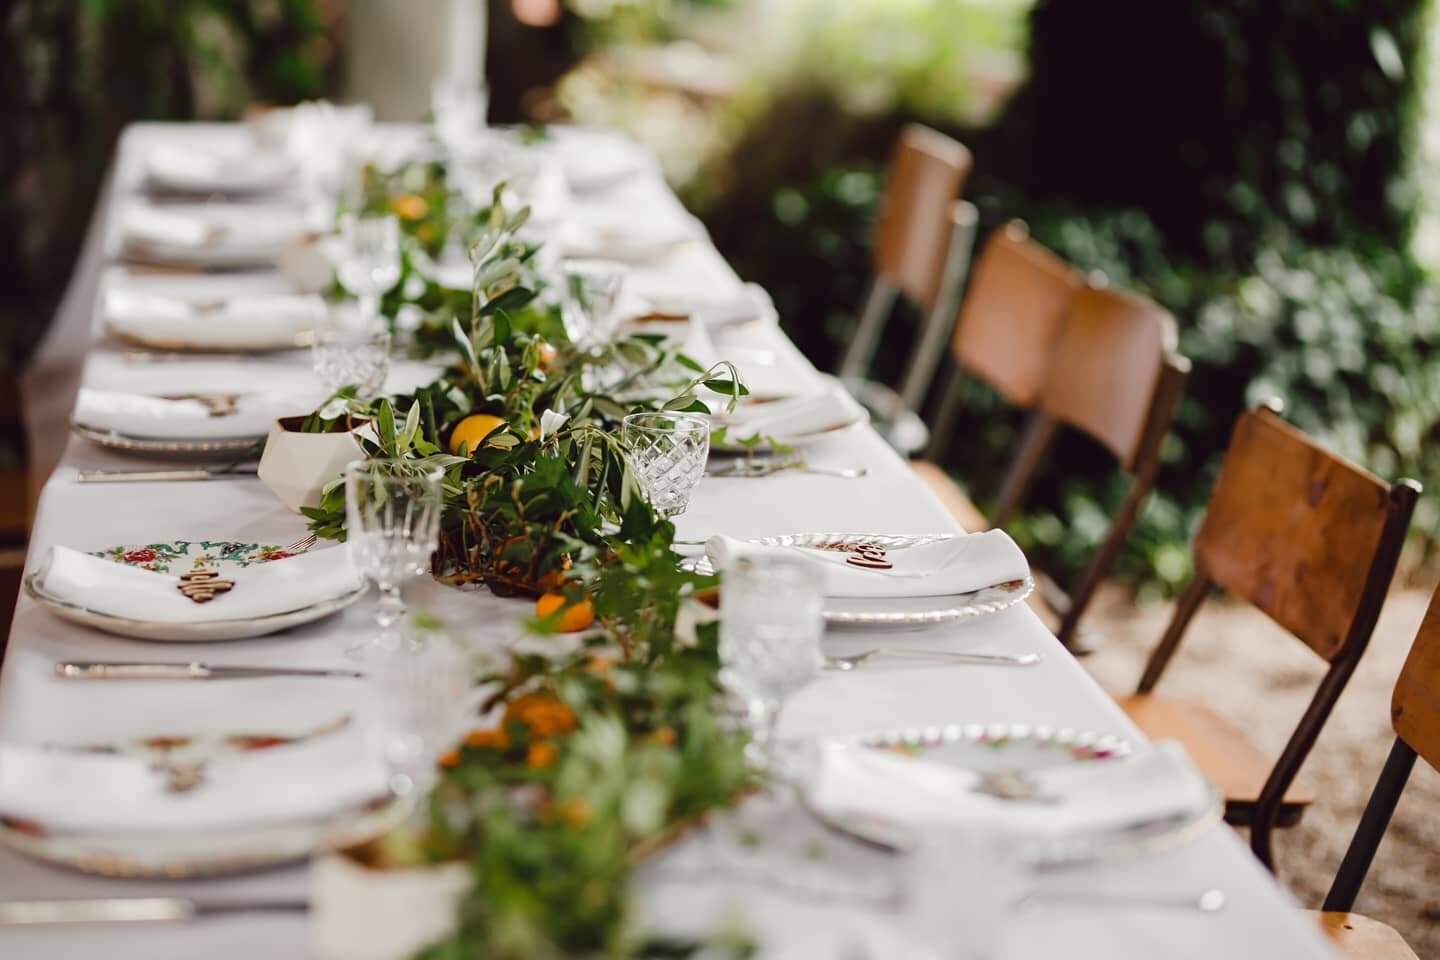 Some wedding tablescape inspo for #weddingwednesday This is a shot from our own intimate wedding reception inside an orangery 🍃🍋🌿🍊

The styling was definitely the part of planning I enjoyed the most - anyone else the same?